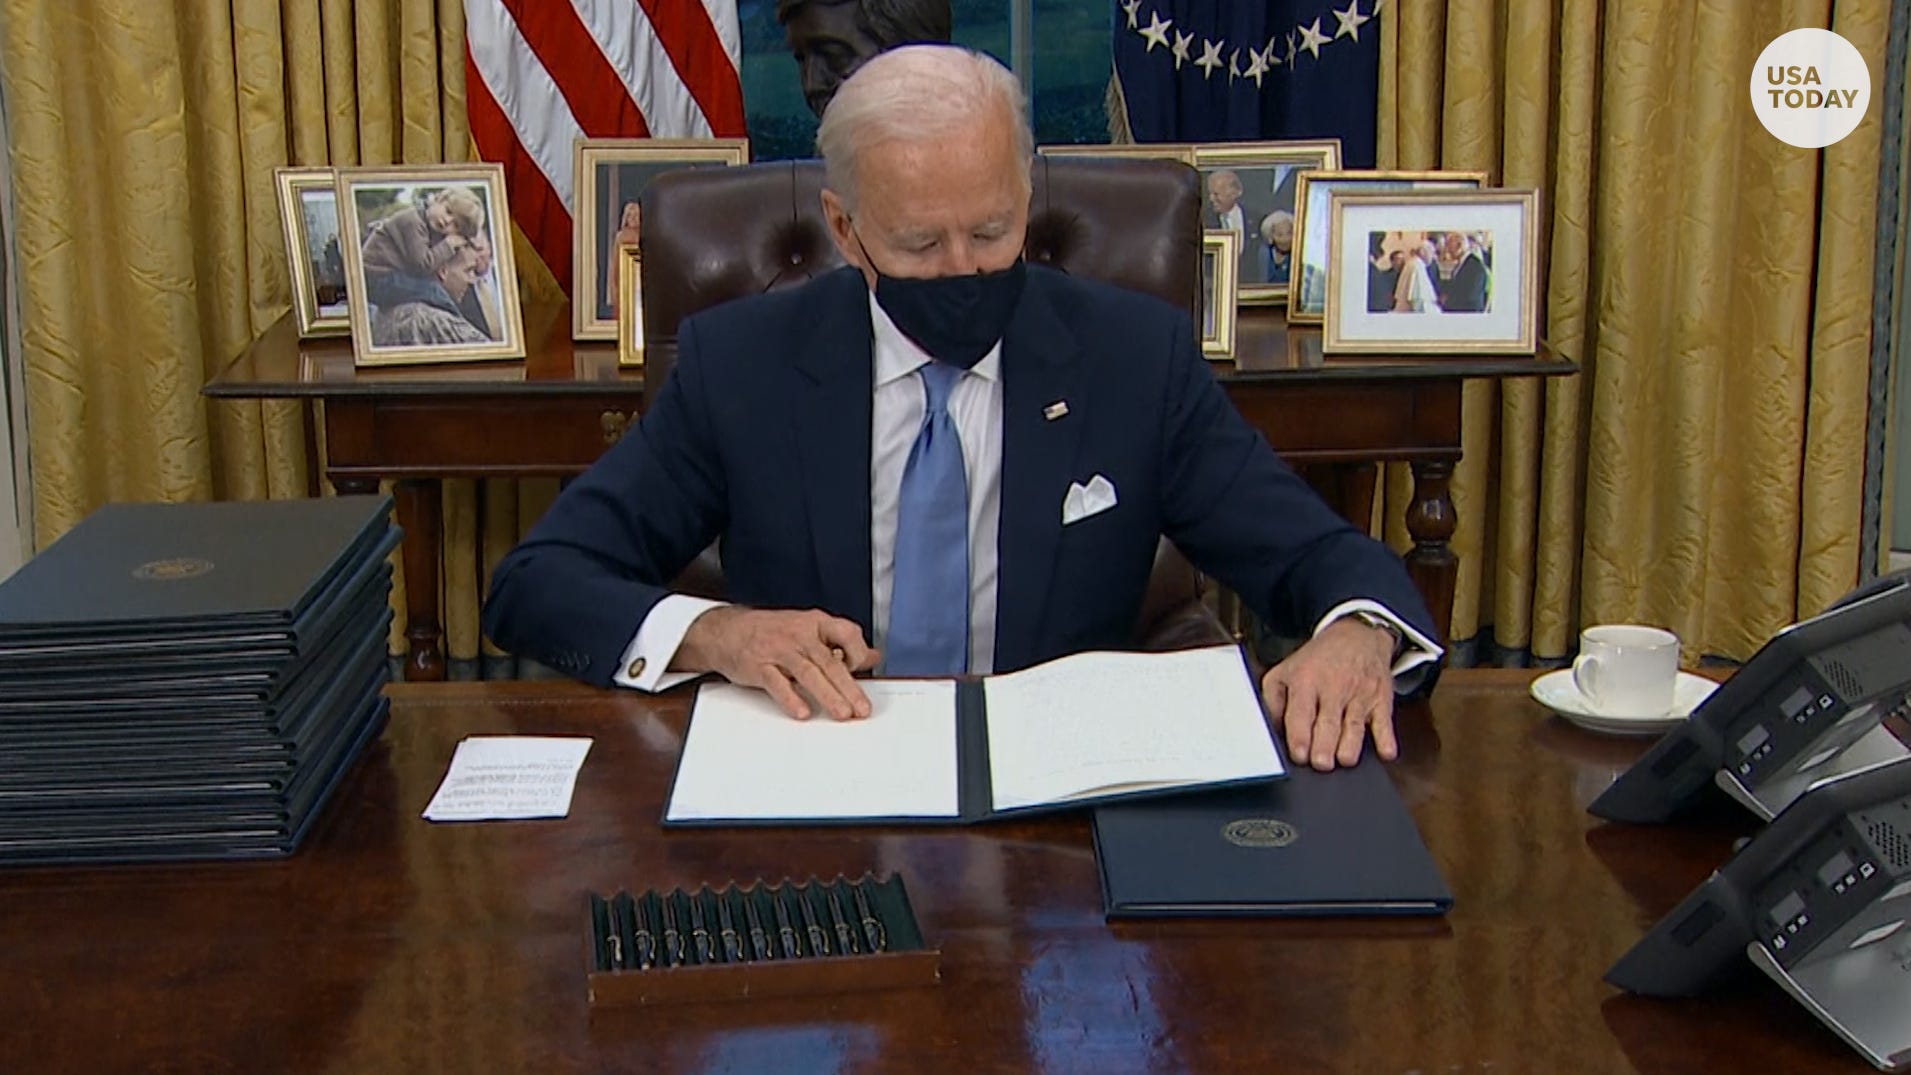 President Biden signs 15 executive orders during first hours in office